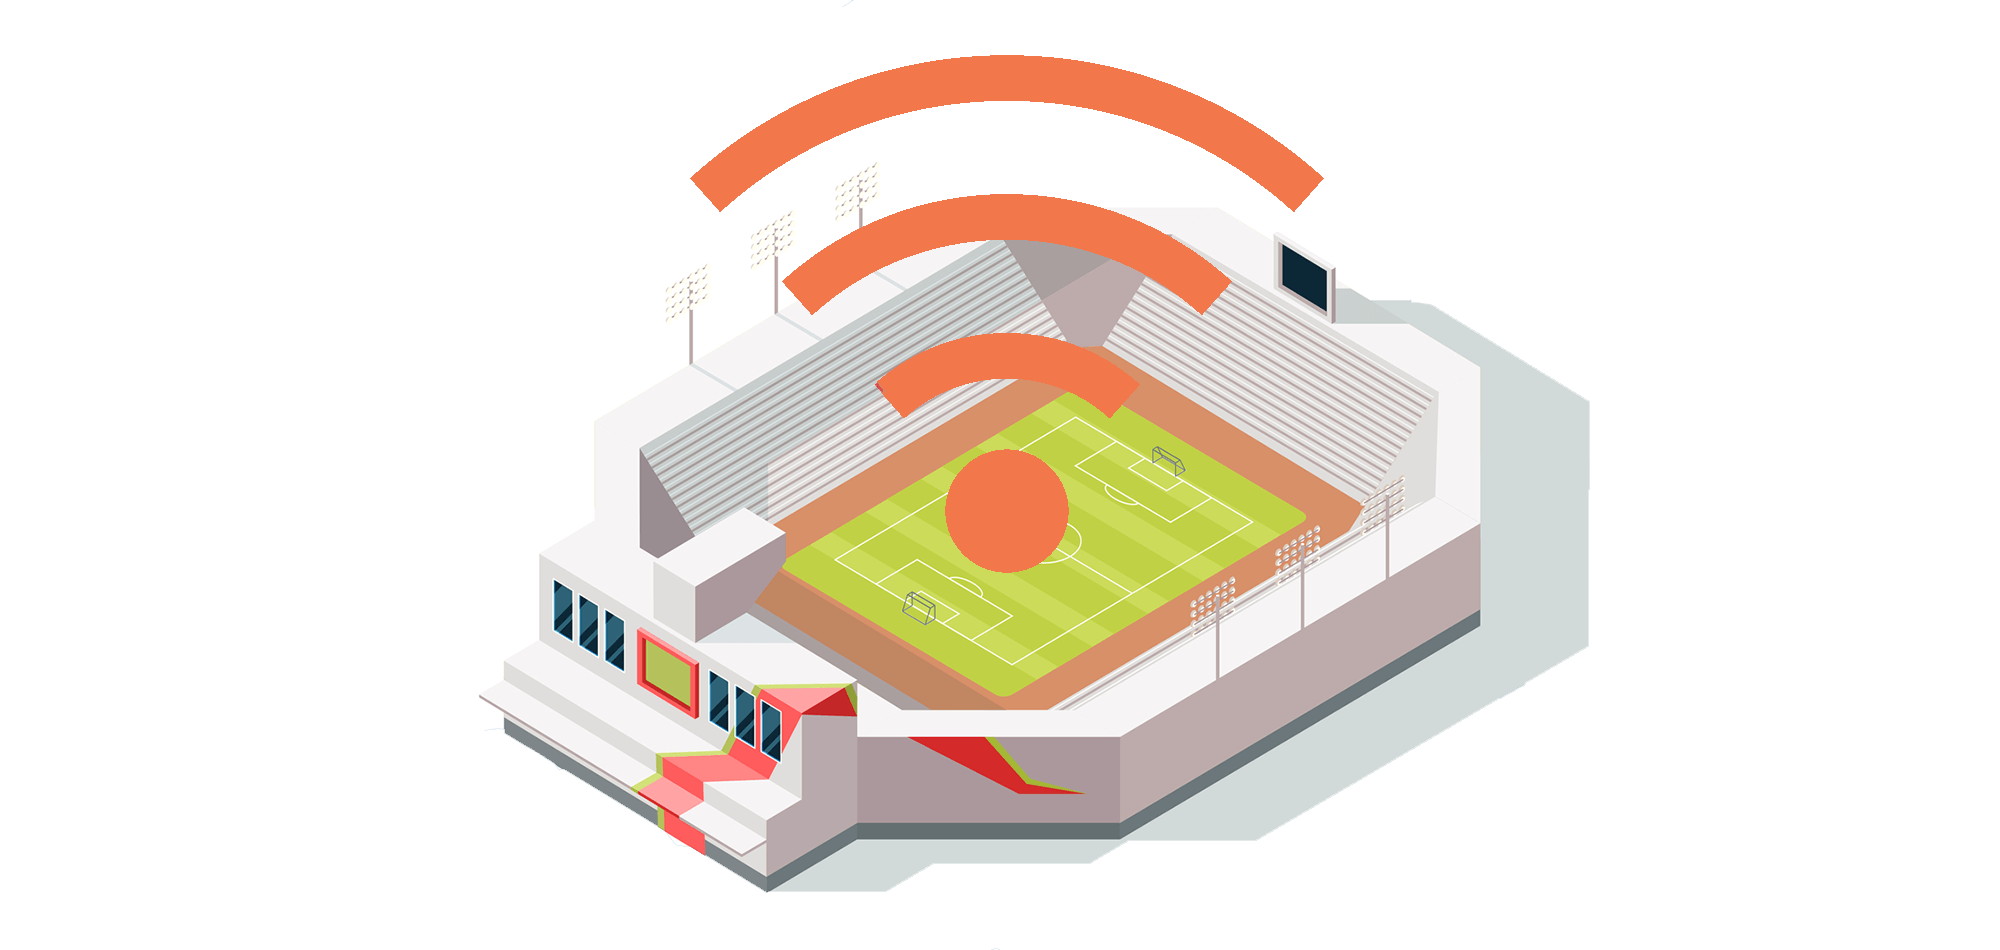 5 Considerations When Designing a Wireless Network for Sports Venues